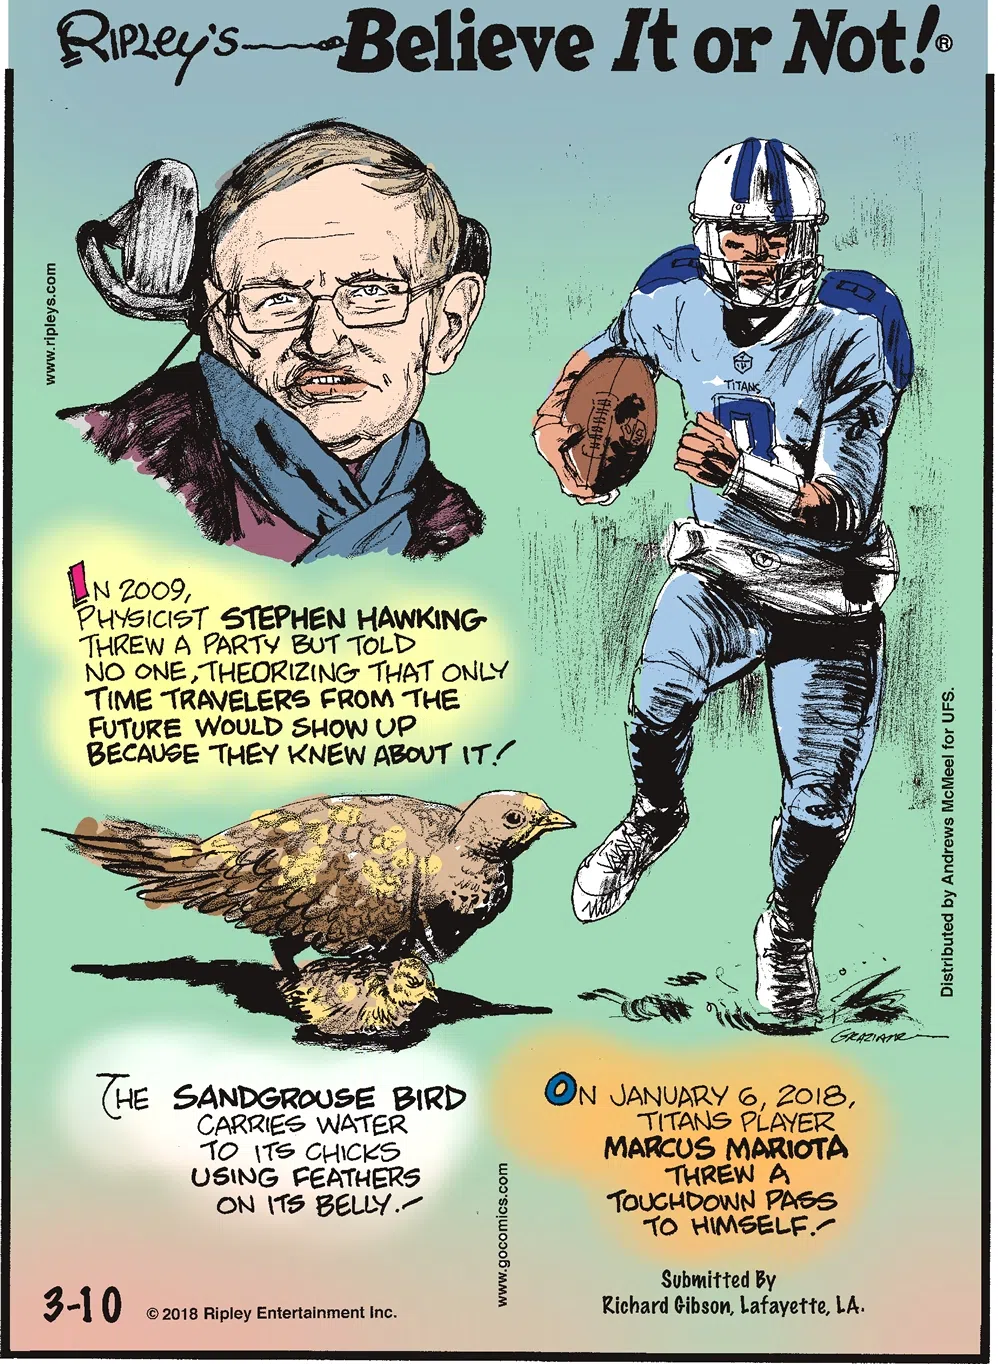 In 2009, physicist Stephen Hawking threw a party but told no one, theorizing that only time travelers from the future would show up because they knew about it!-------------------- The sandgrouse bird carries water to its chicks using feathers on its belly!-------------------- On January 6, 2018, Titans player Marcus Mariota threw a touchdown pass to himself! Submitted by Richard Gibson, Lafayette, LA.